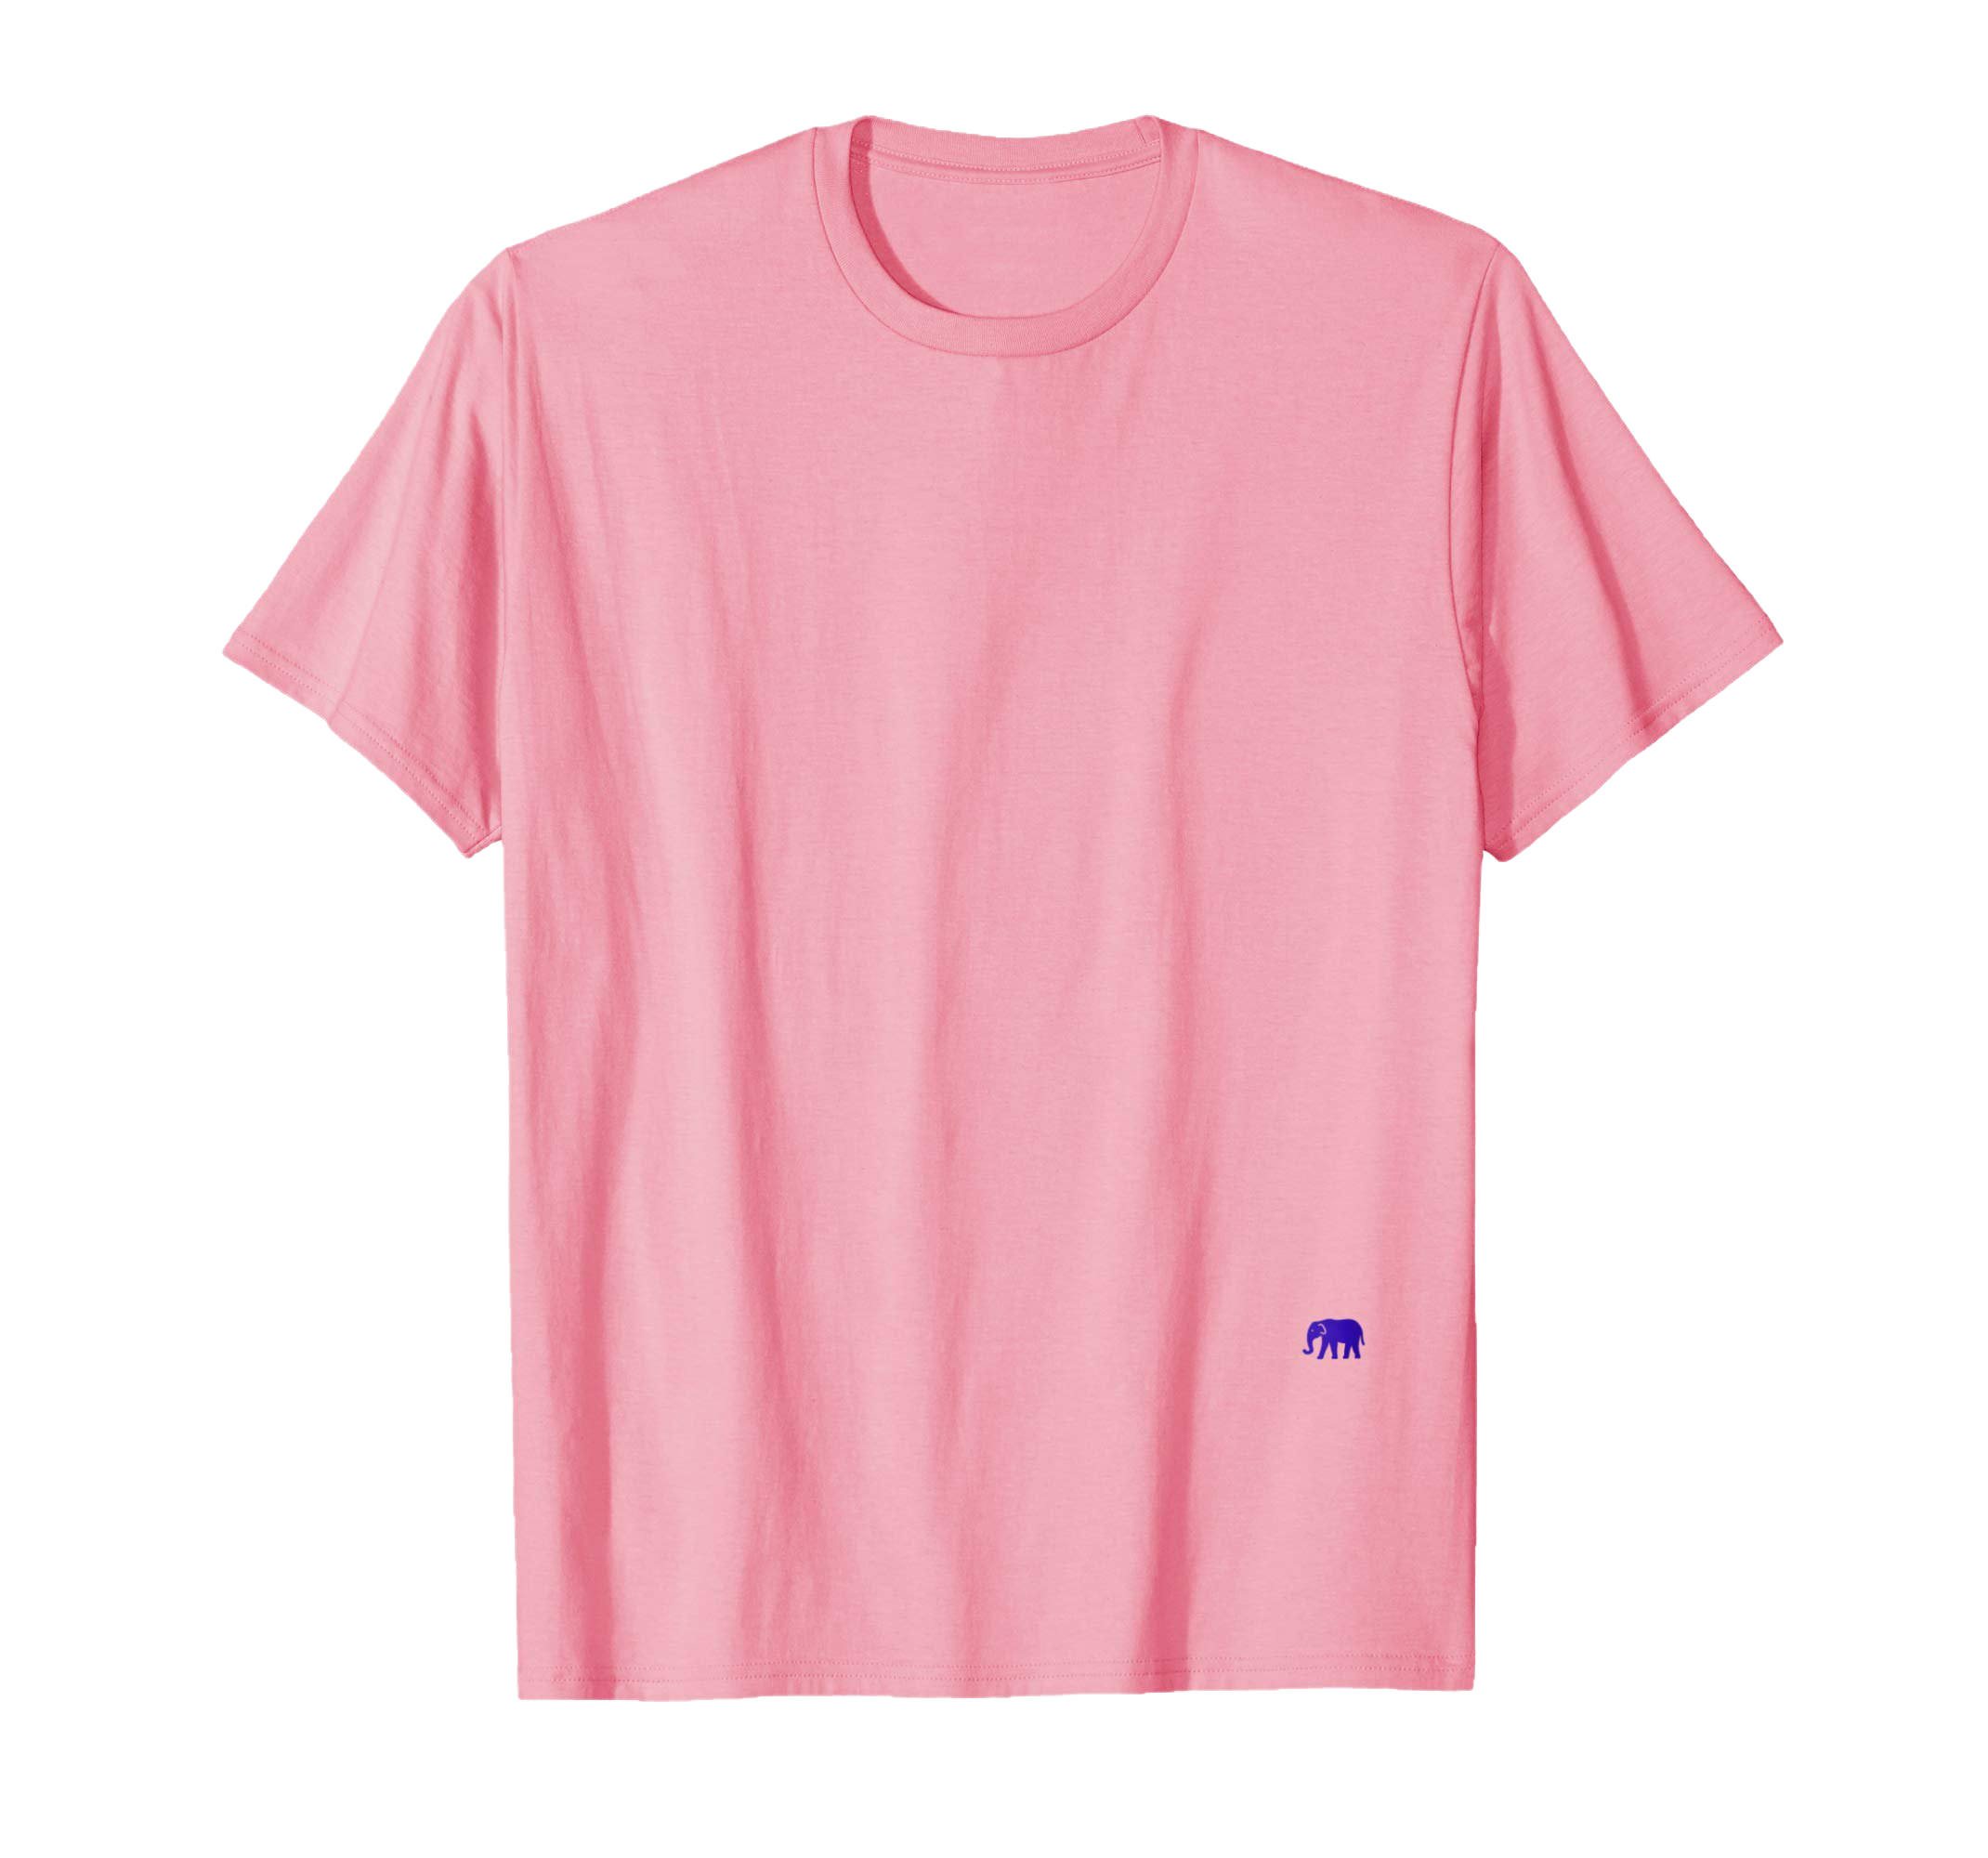 T-shirt rose simple Photo PNG